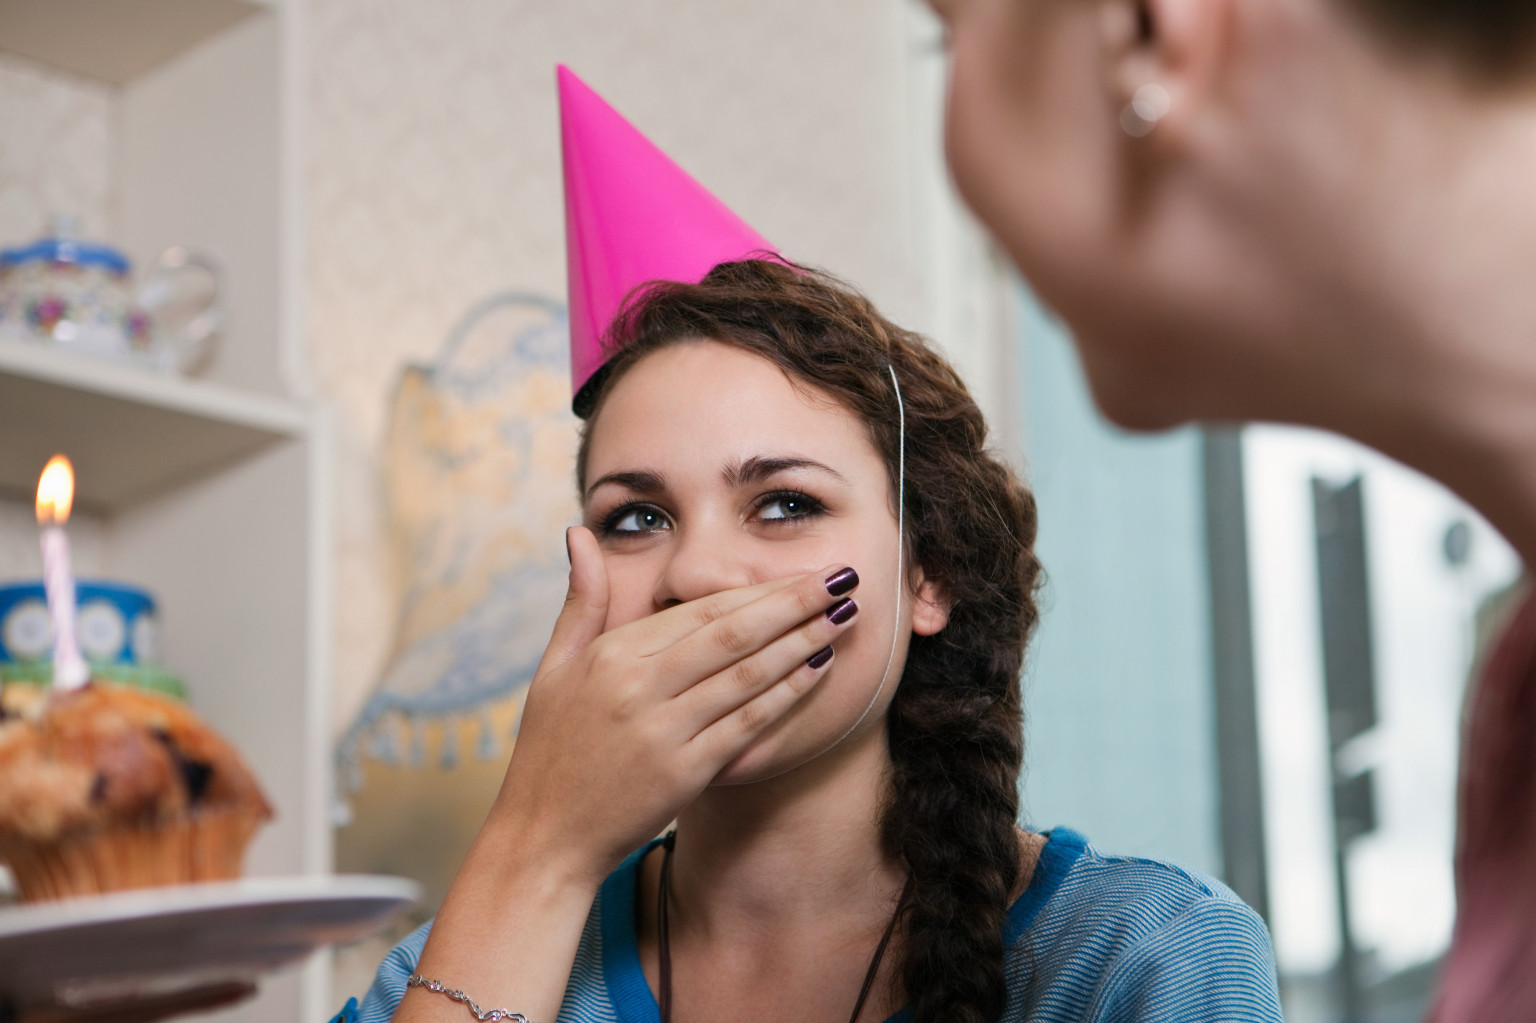 Can You Spell the Most Commonly Misspelled Words? Quiz surprise birthday